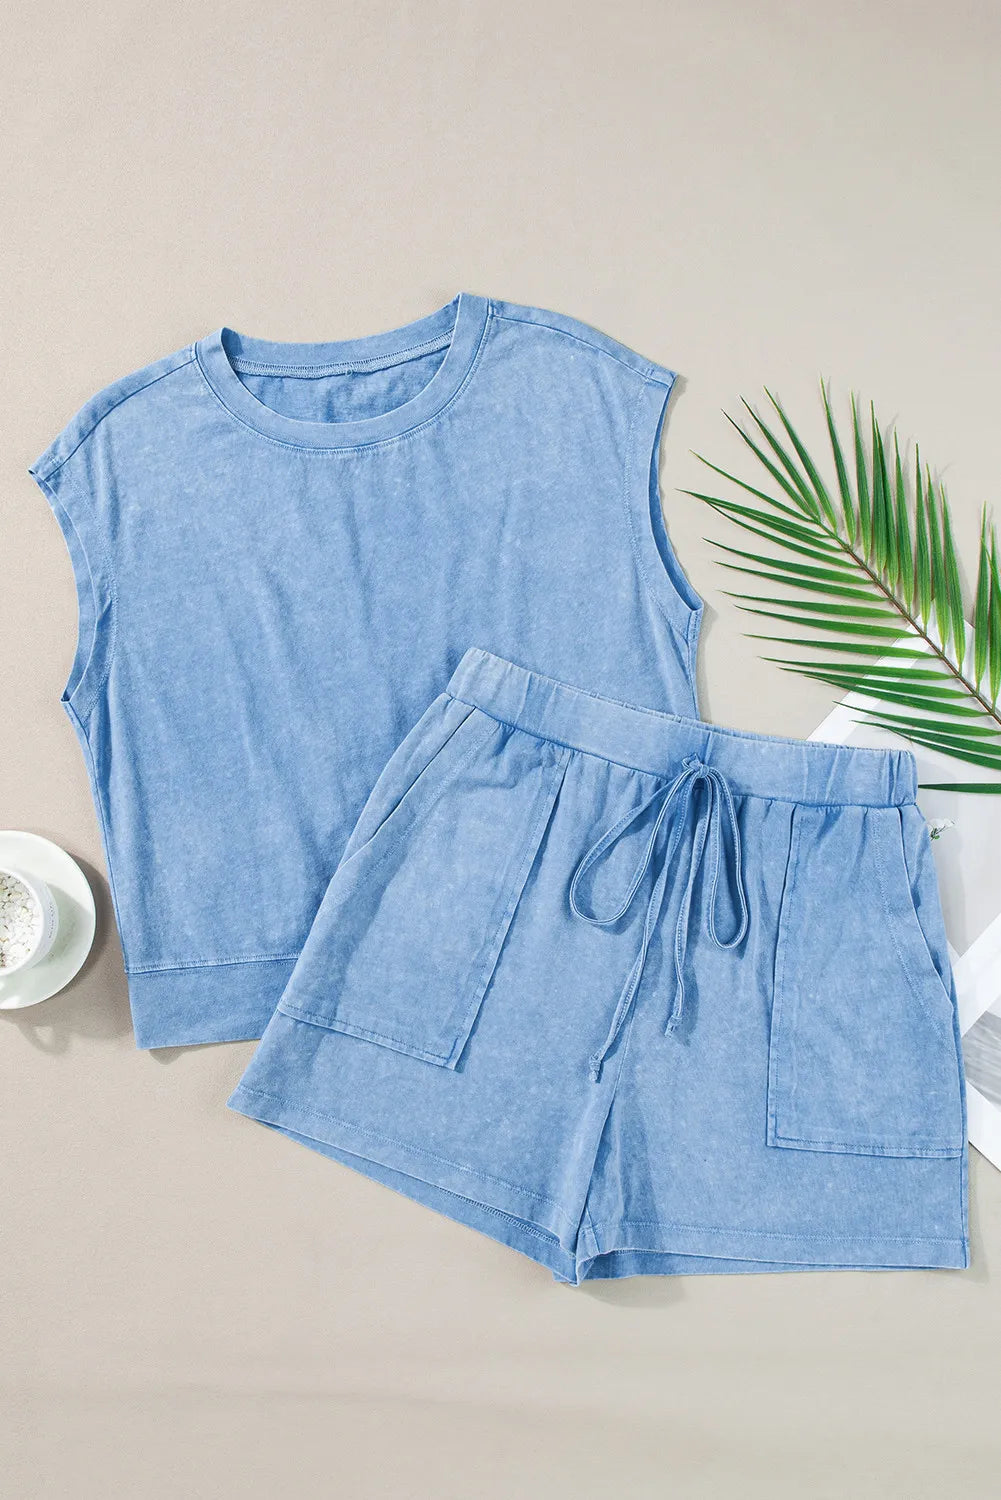 Round Neck Short Sleeve Top and Shorts Set